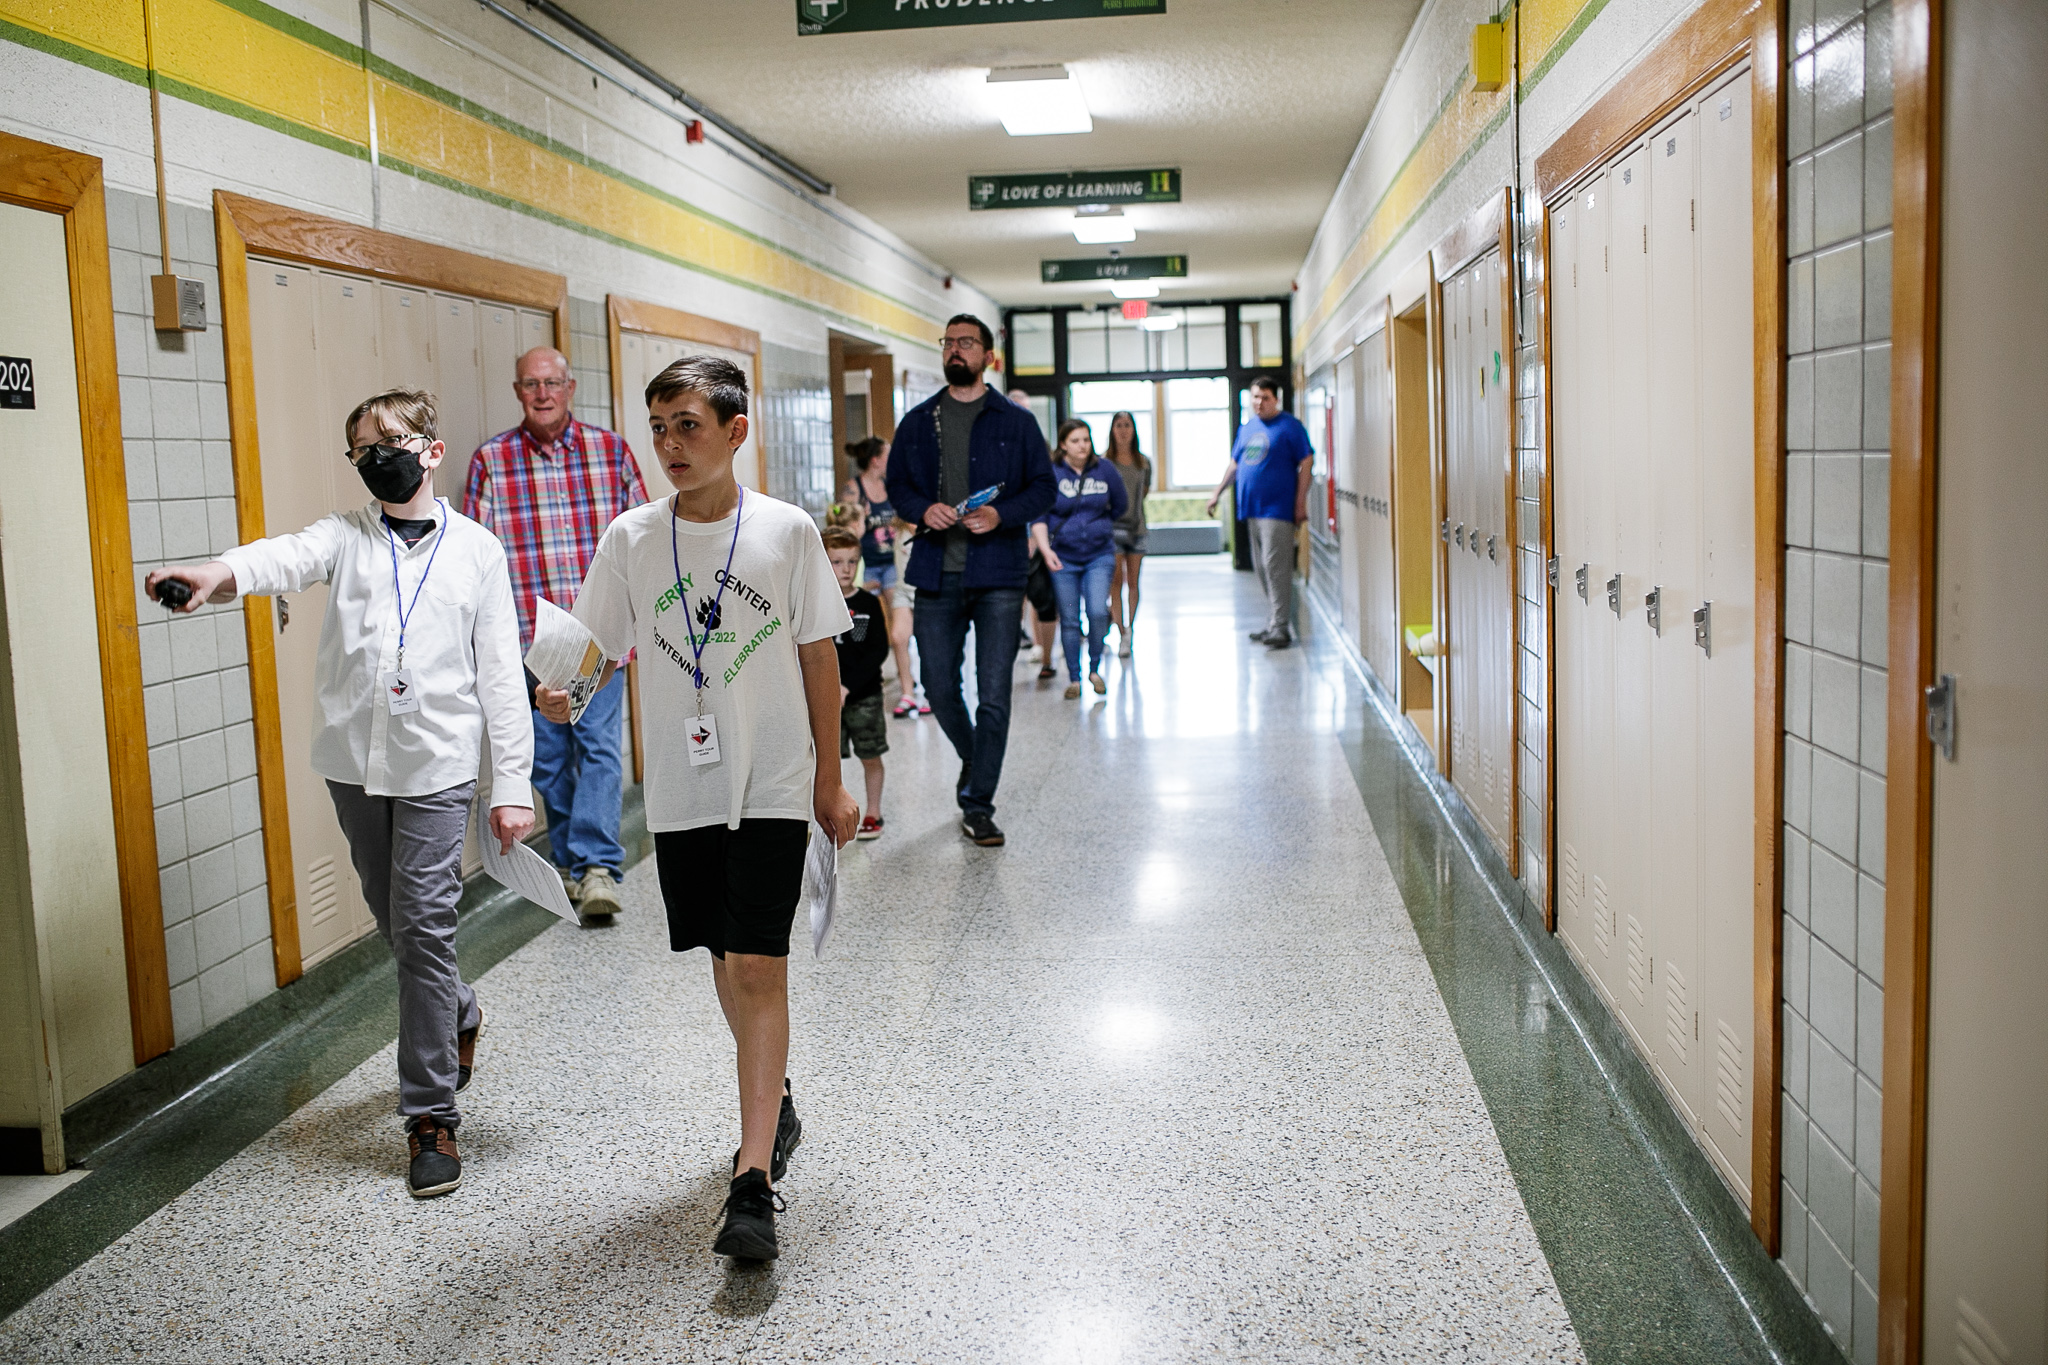 Students at Perry Center gave guided tours to the building during the Perry Center Centennial Event in Grand Blanc on Saturday, May 14, 2022. (Jenifer Veloso | MLive.com)